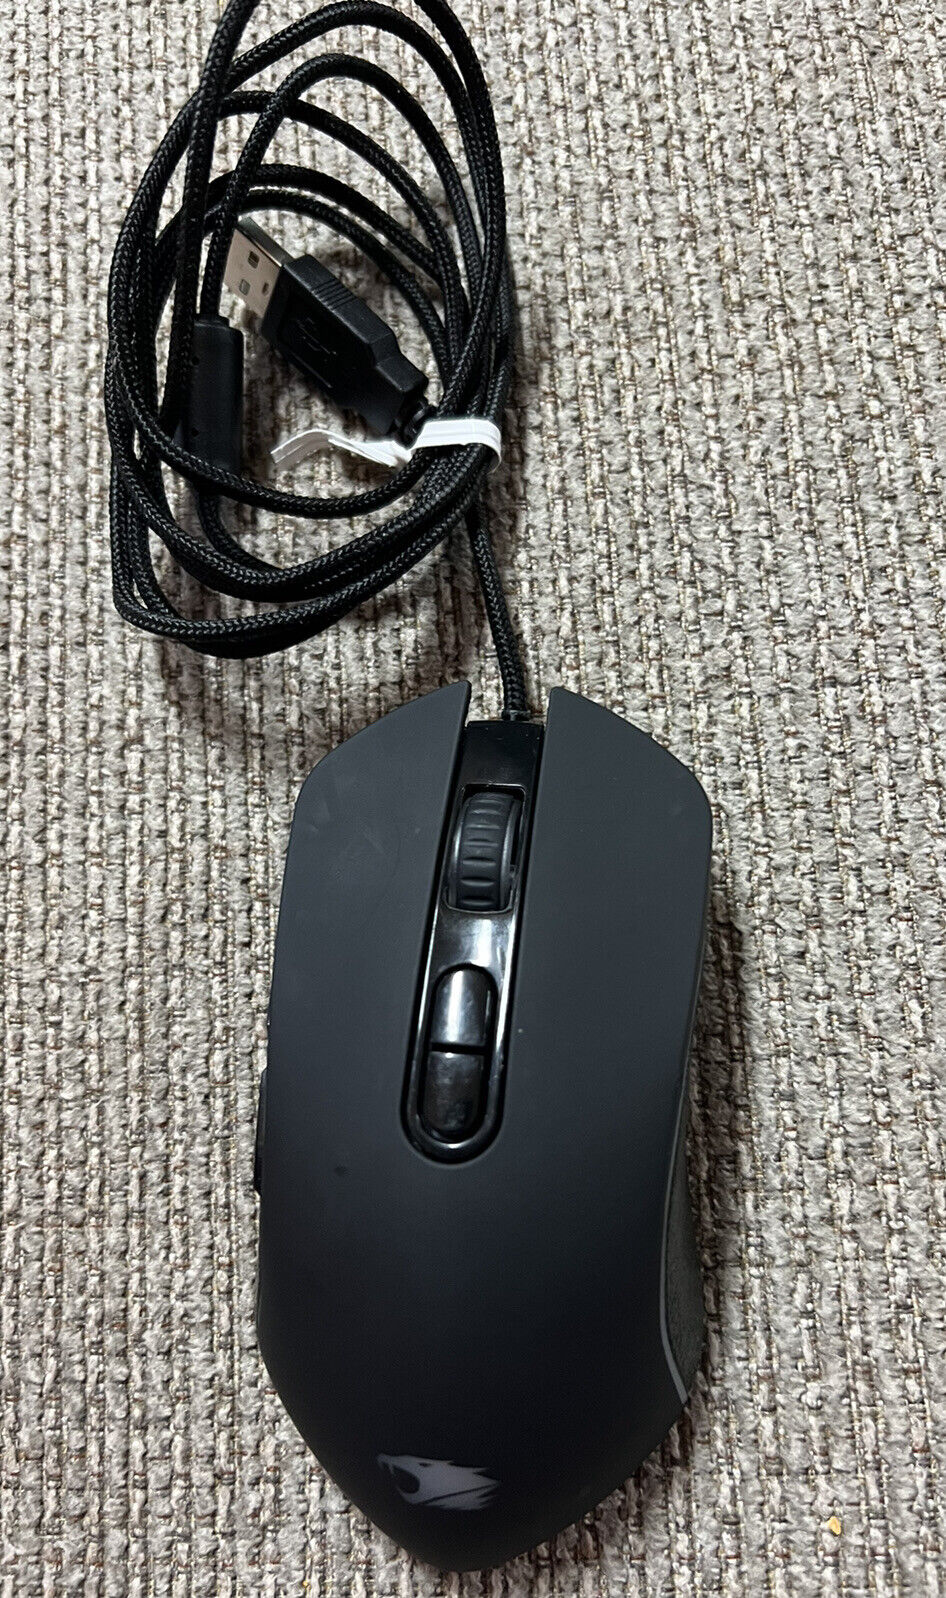 iBuyPower Standard Black USB Mouse  IBP-ARES M2-MS Dell Apple Lenovo HP Acer